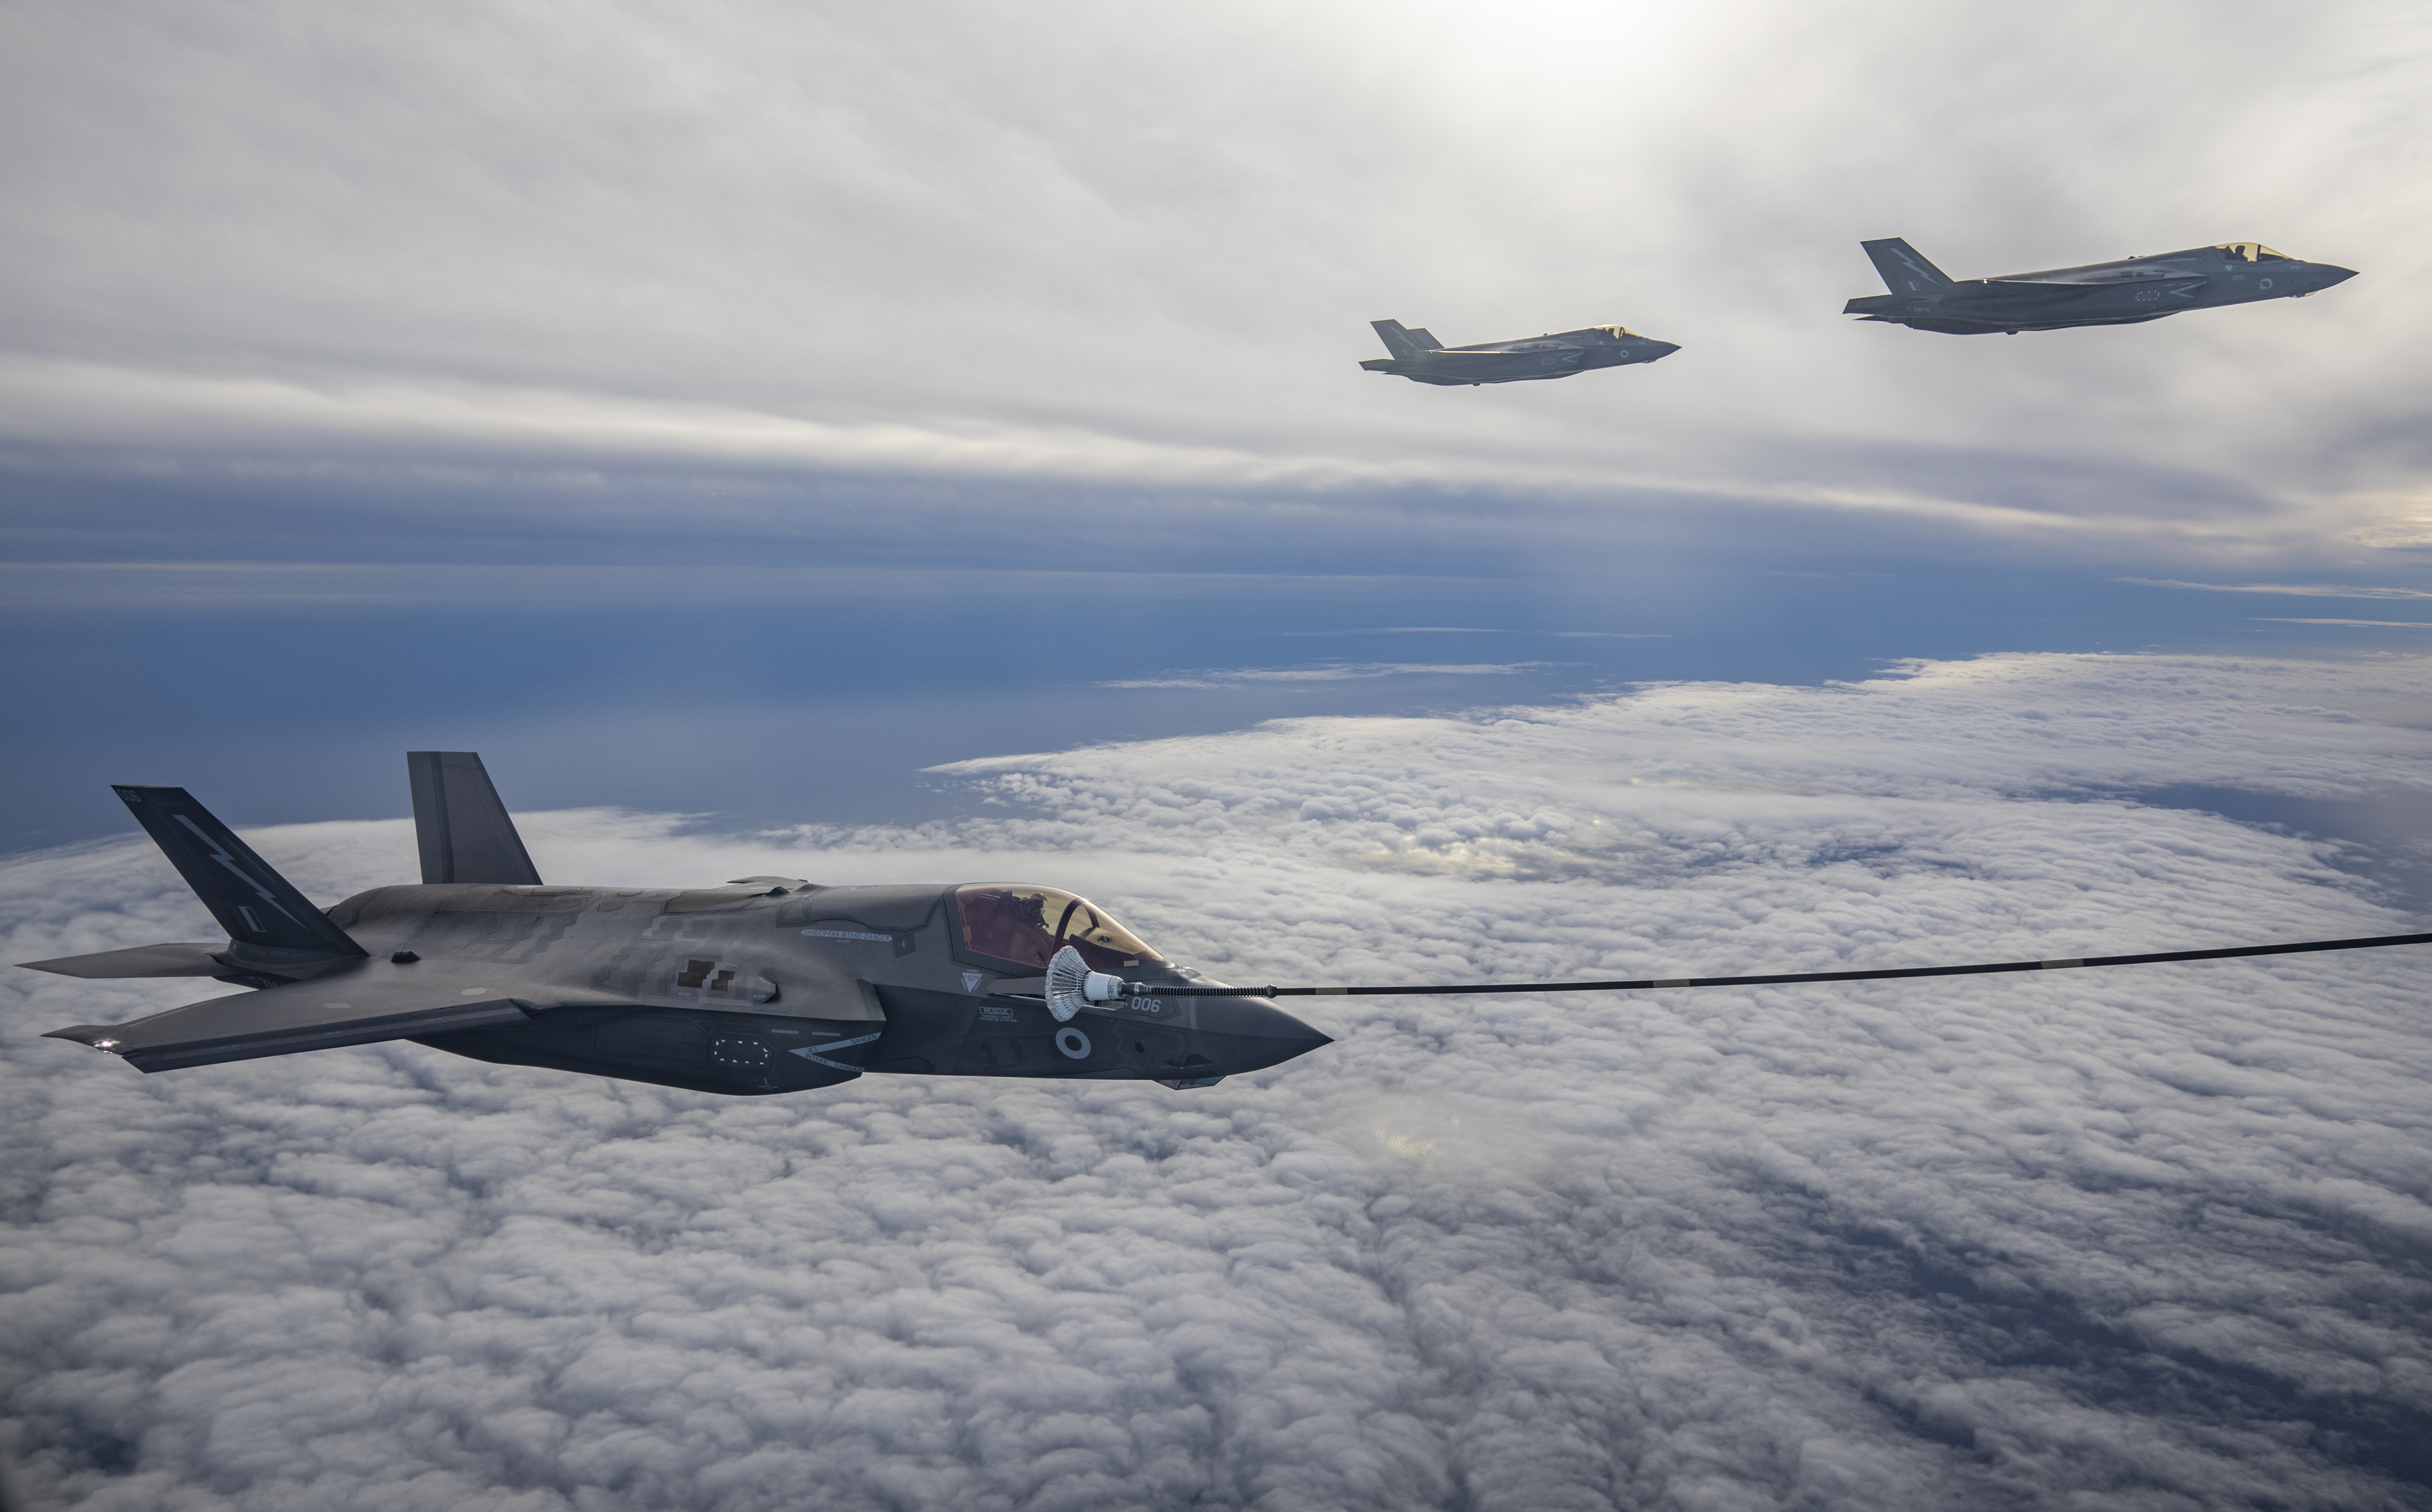 Typhoon during air-to-air refuelling above the clouds. Two Typhoons in the background.